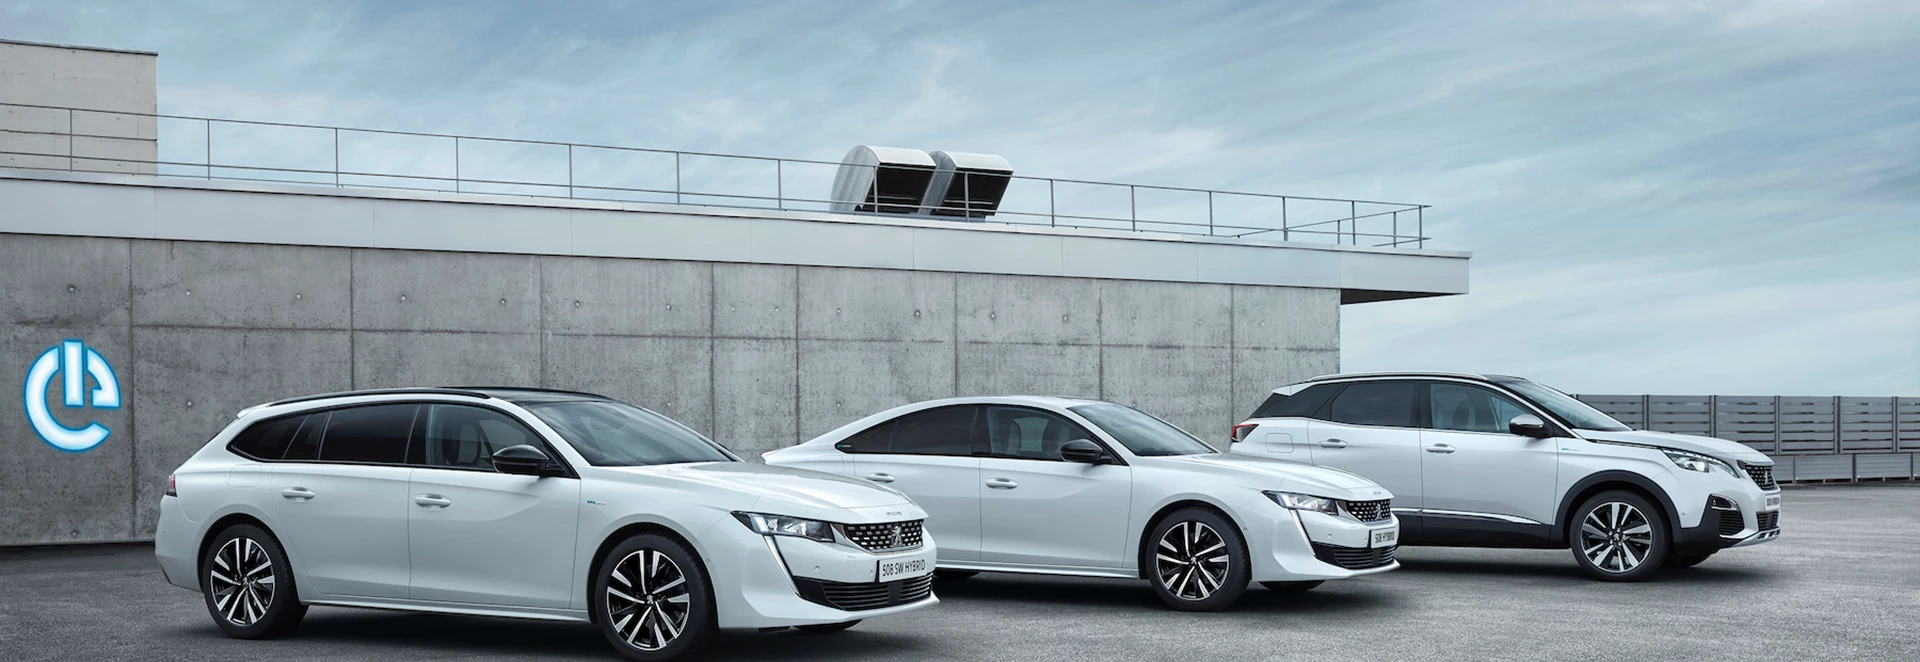 Reservations open for Peugeot’s new range of plug-in hybrids